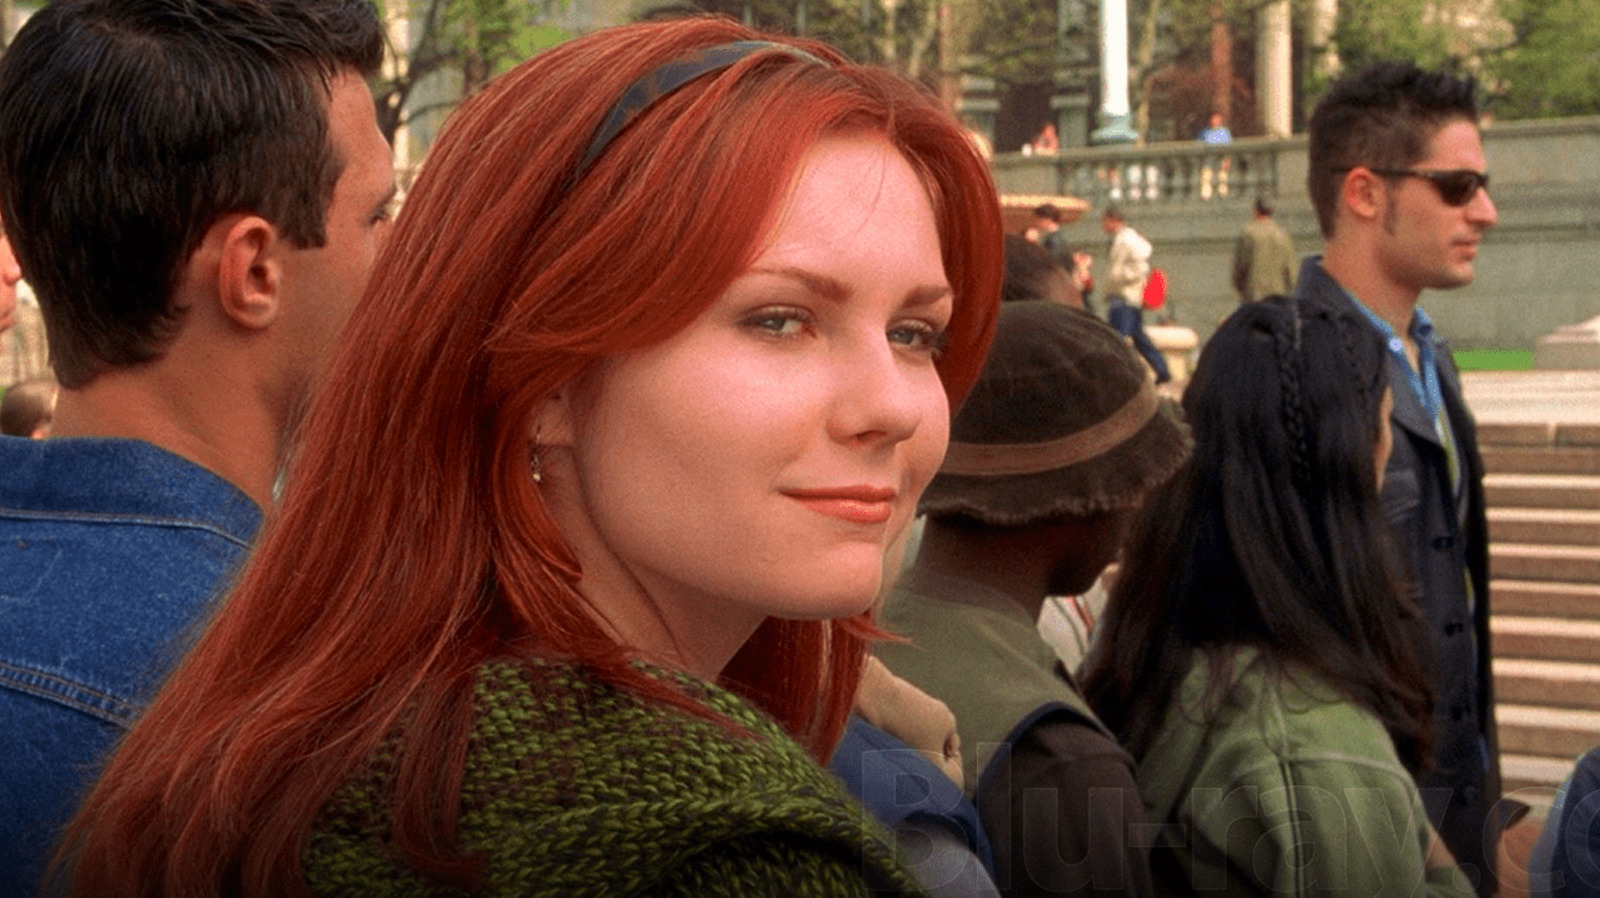 https://www.slashfilm.com/img/gallery/kirsten-dunst-wants-to-play-mary-jane-again-in-the-marvel-multiverse/l-intro-1647554708.jpg